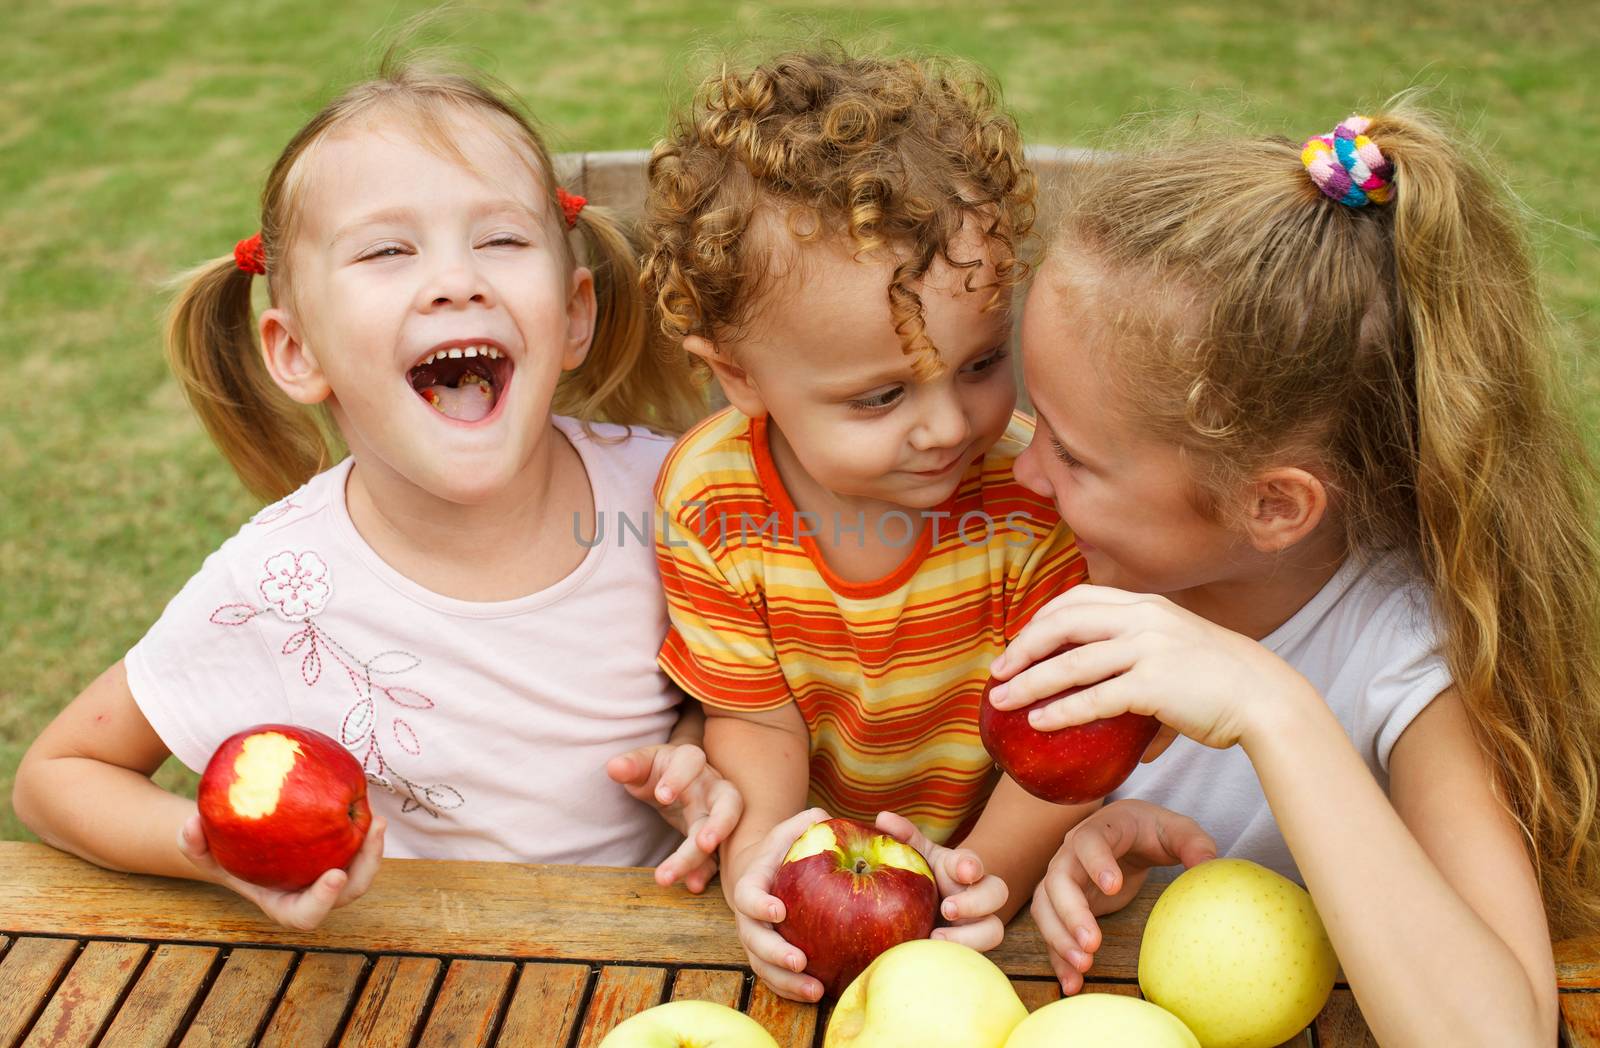 three happy children sitting at the table and eat apples